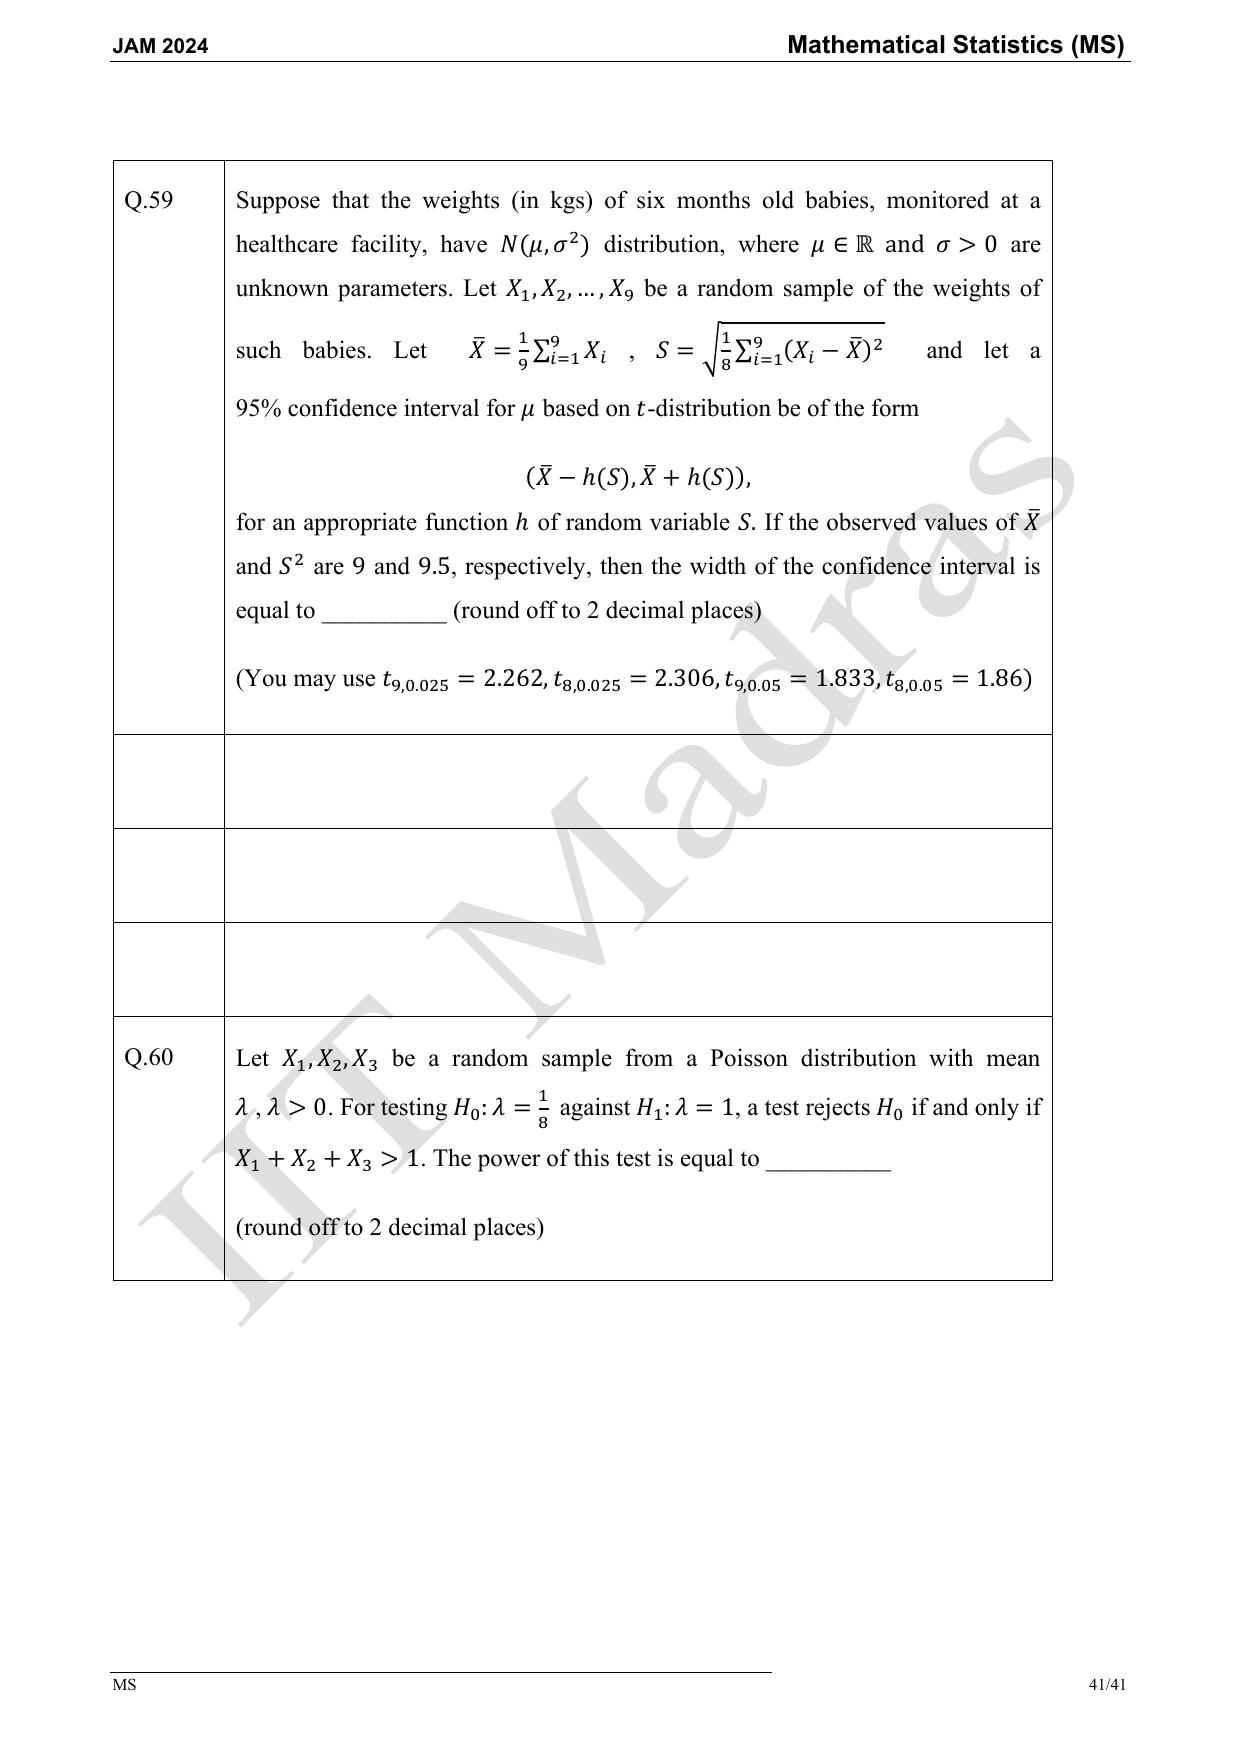 IIT JAM 2024 Mathematical Statistics (MS) Master Question Paper - Page 41